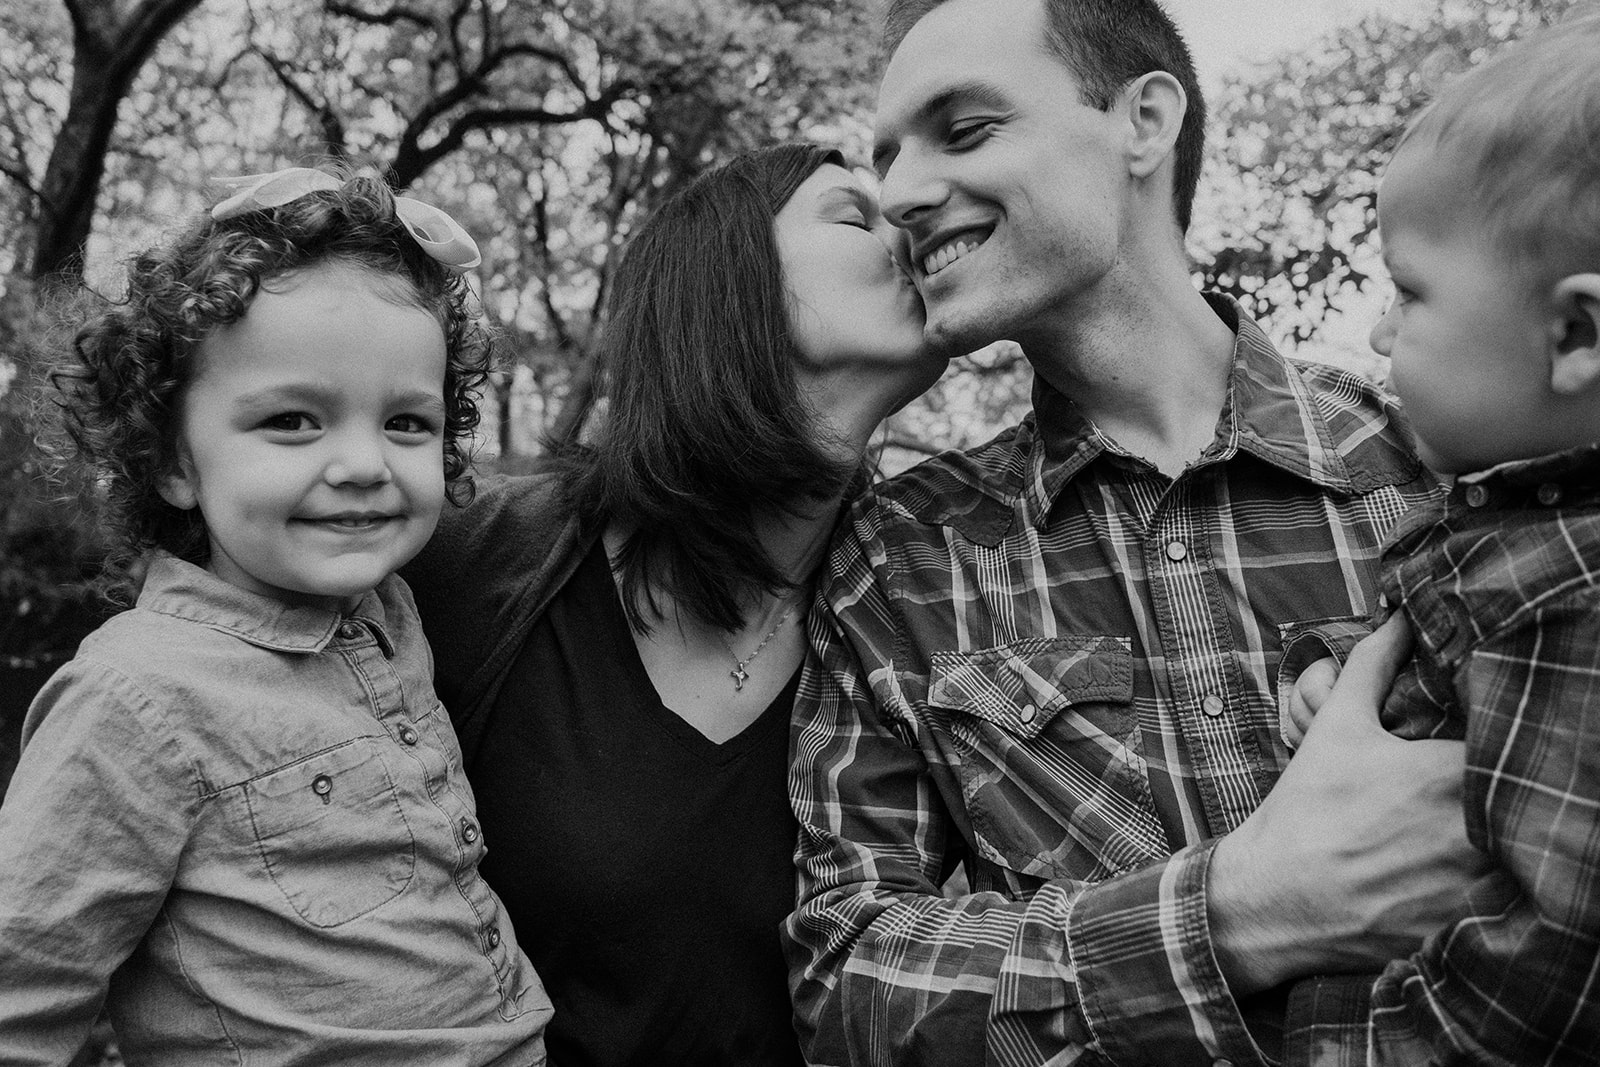 A mother kisses her husbands cheek while her children smile.